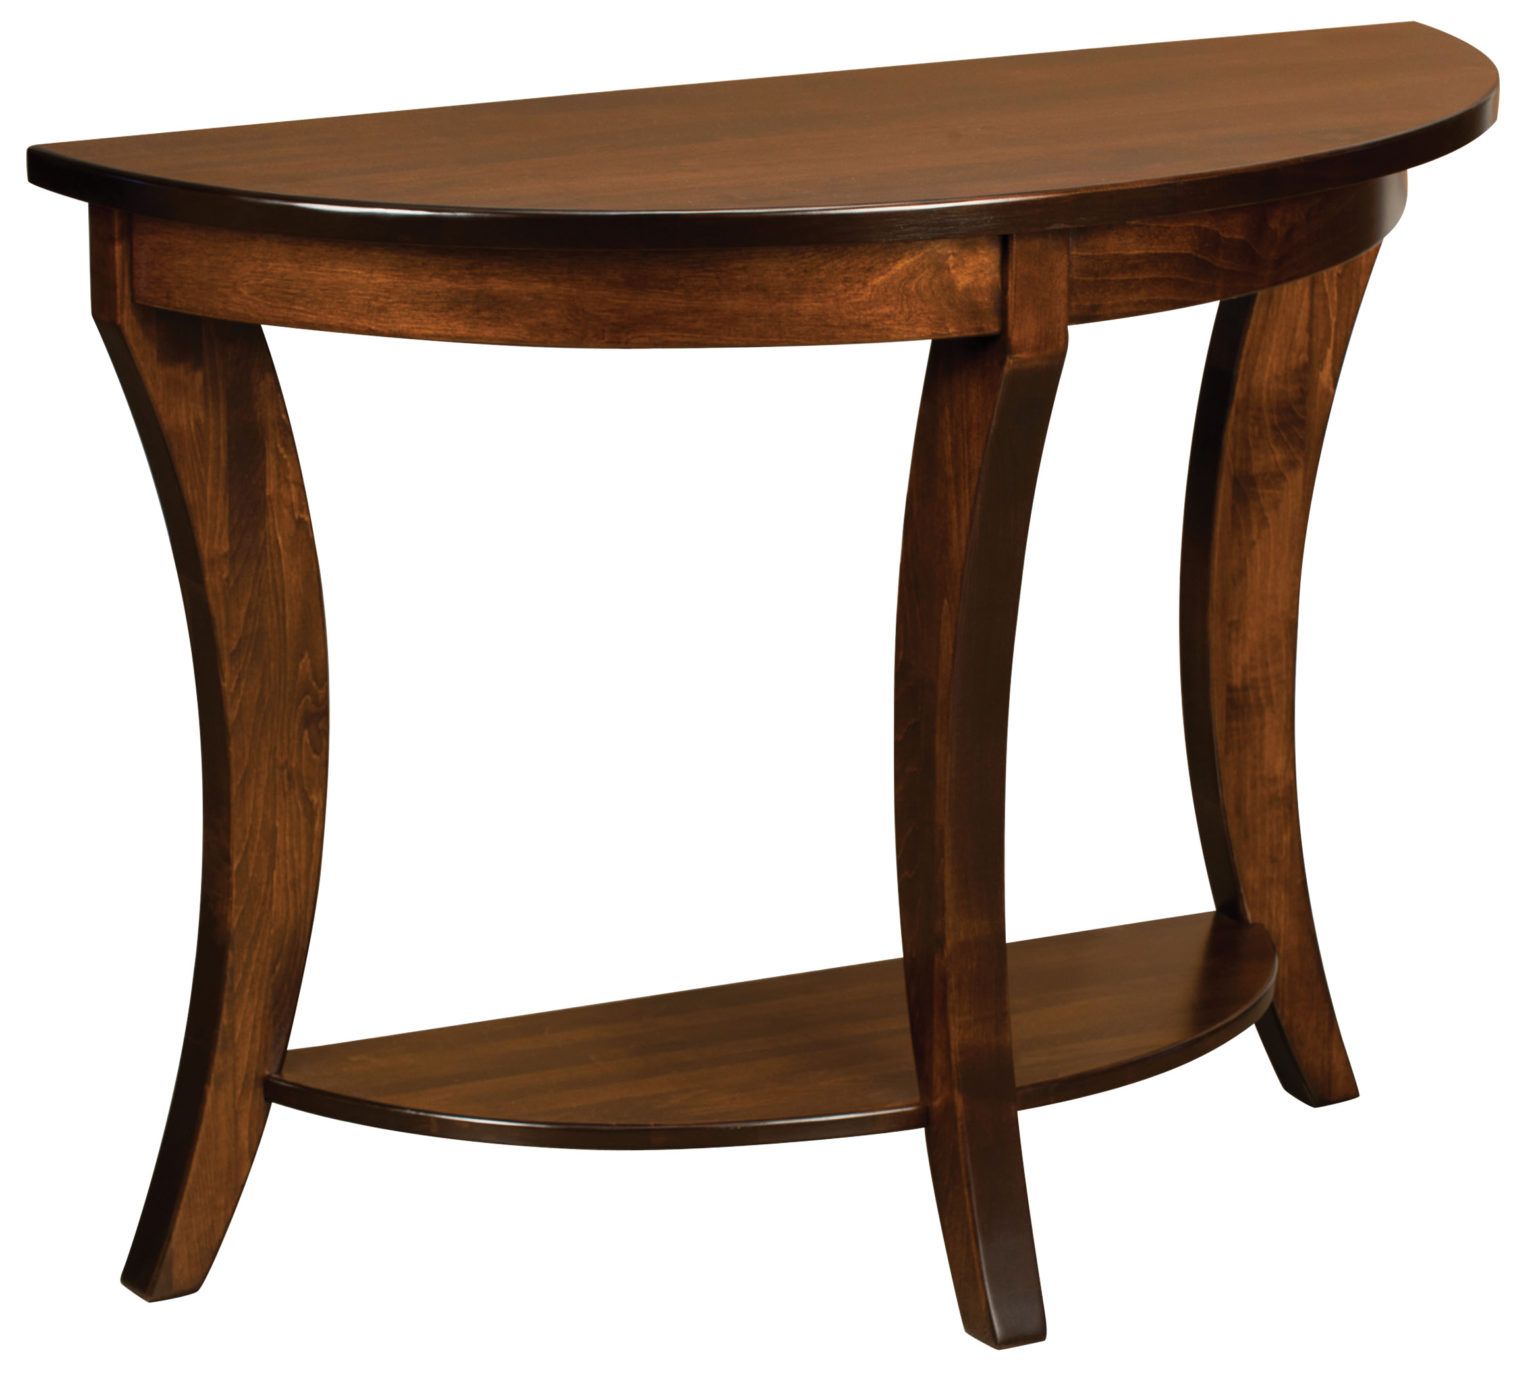 Madison Sofa Table | Amish Solid Wood Sofa Tables | Kvadro With Espresso Wood Storage Console Tables (View 6 of 20)